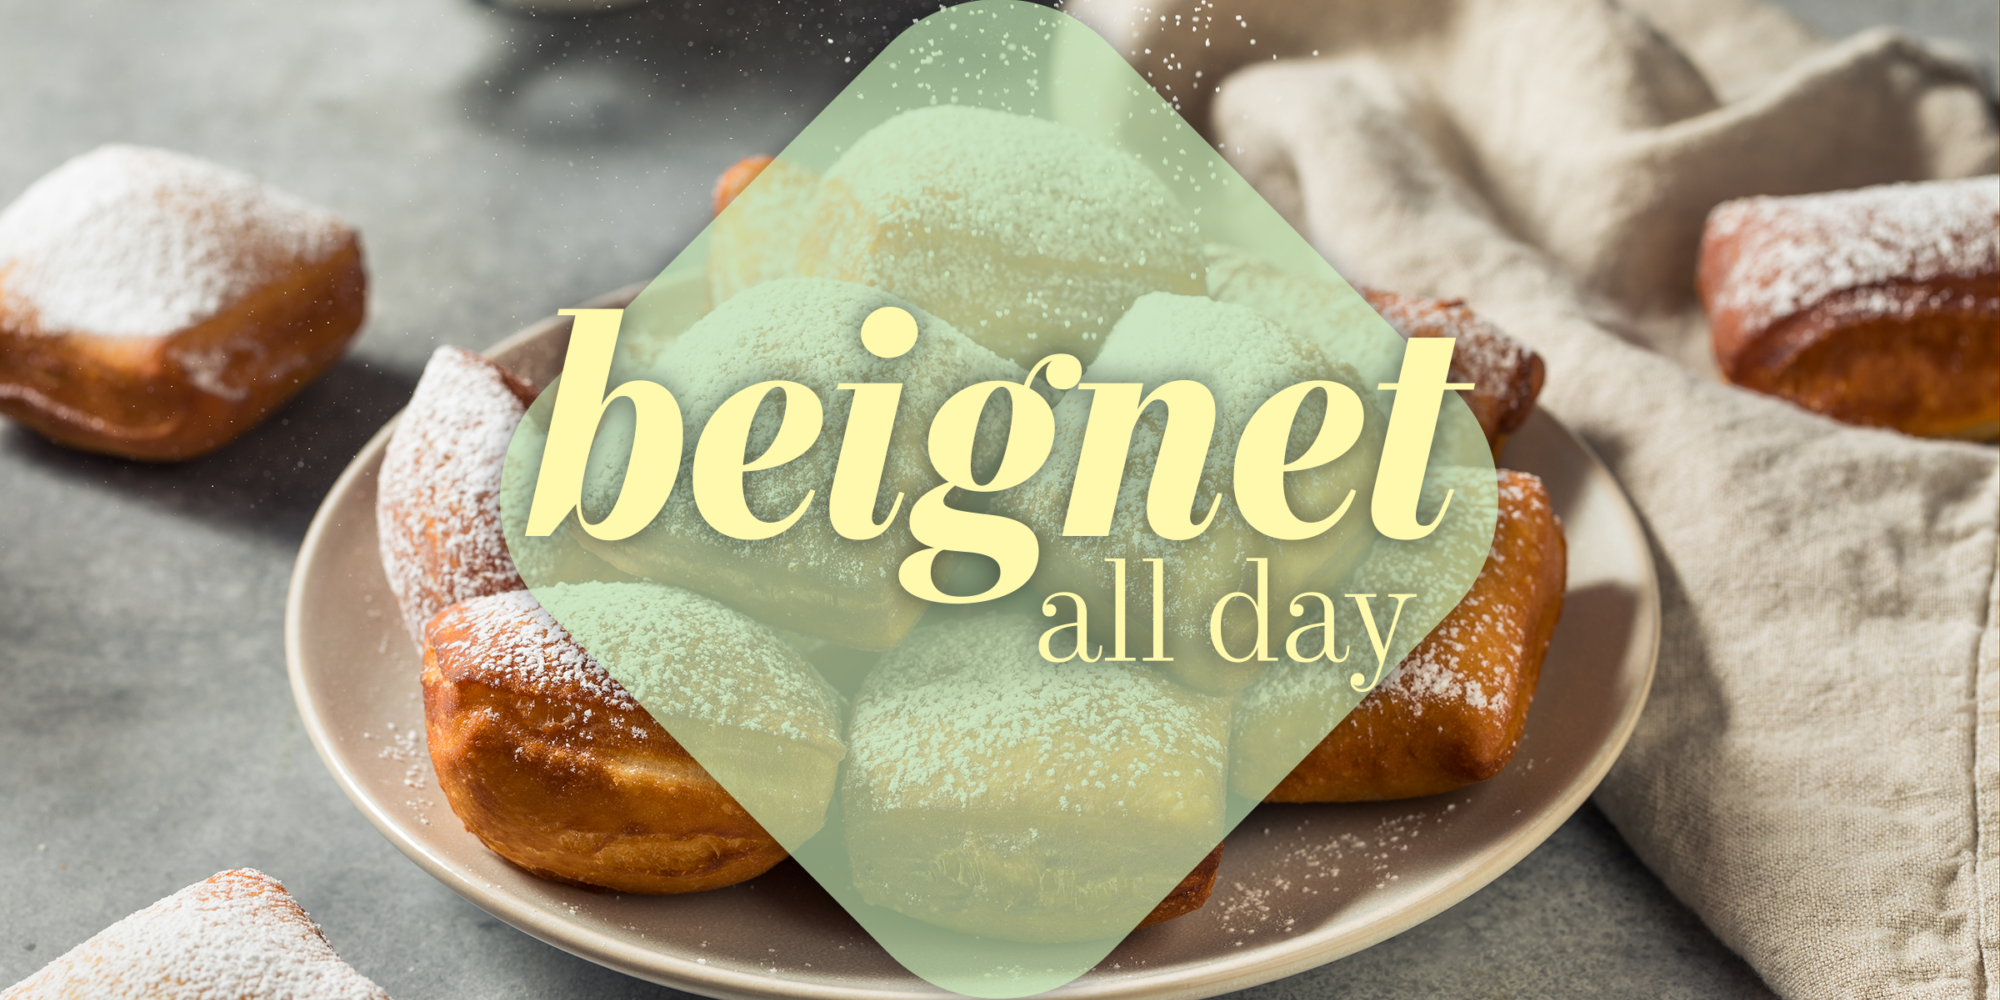 Beignet All Day, located at the Urban Eats Neighborhood Food Hall in Downtown Dutchtown, St. Louis, MO.